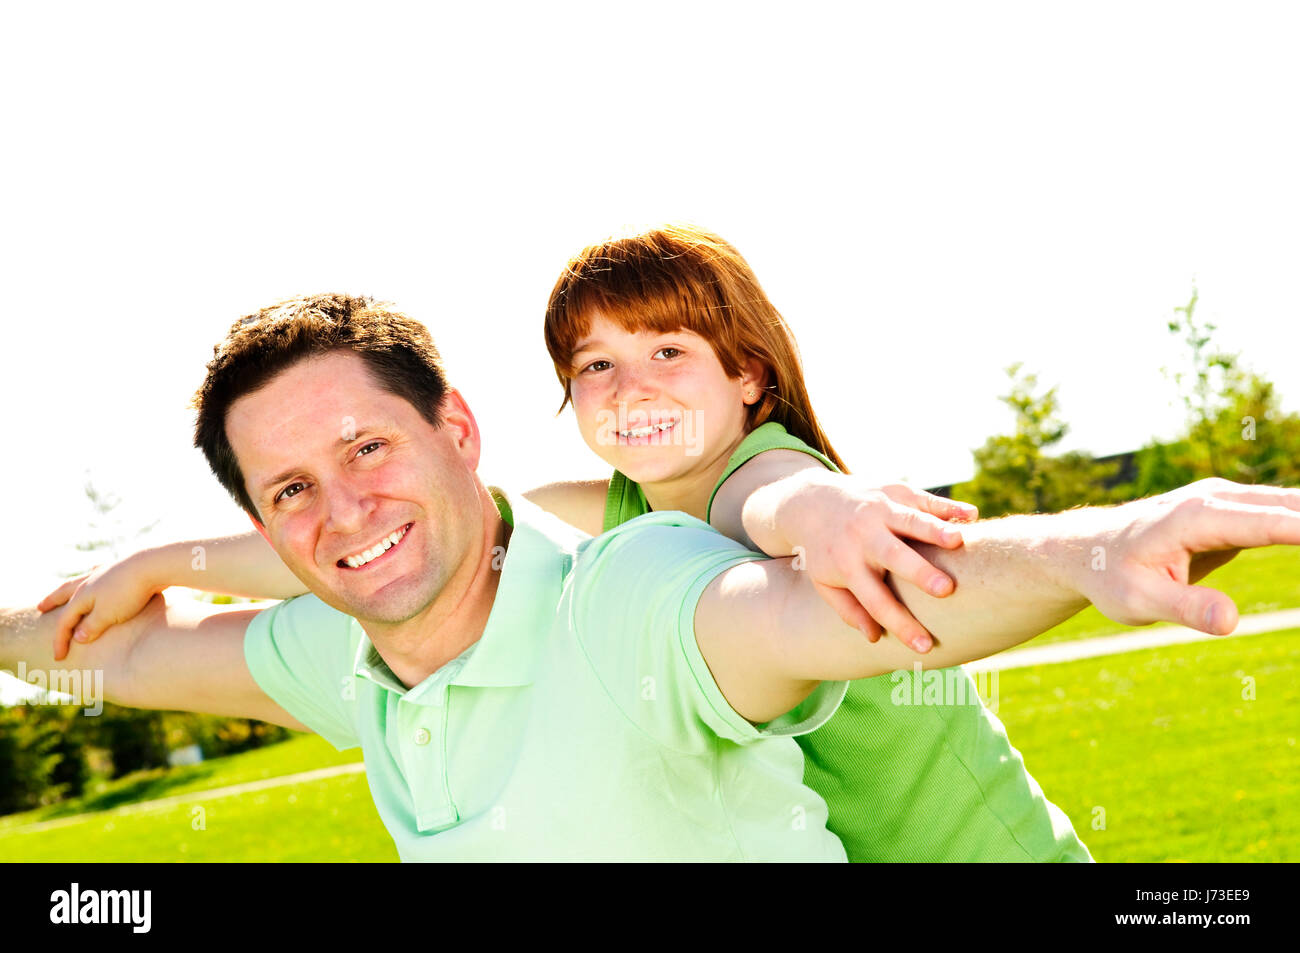 ride aircraft aeroplane plane airplane daugther daughter father daddy dad laugh Stock Photo